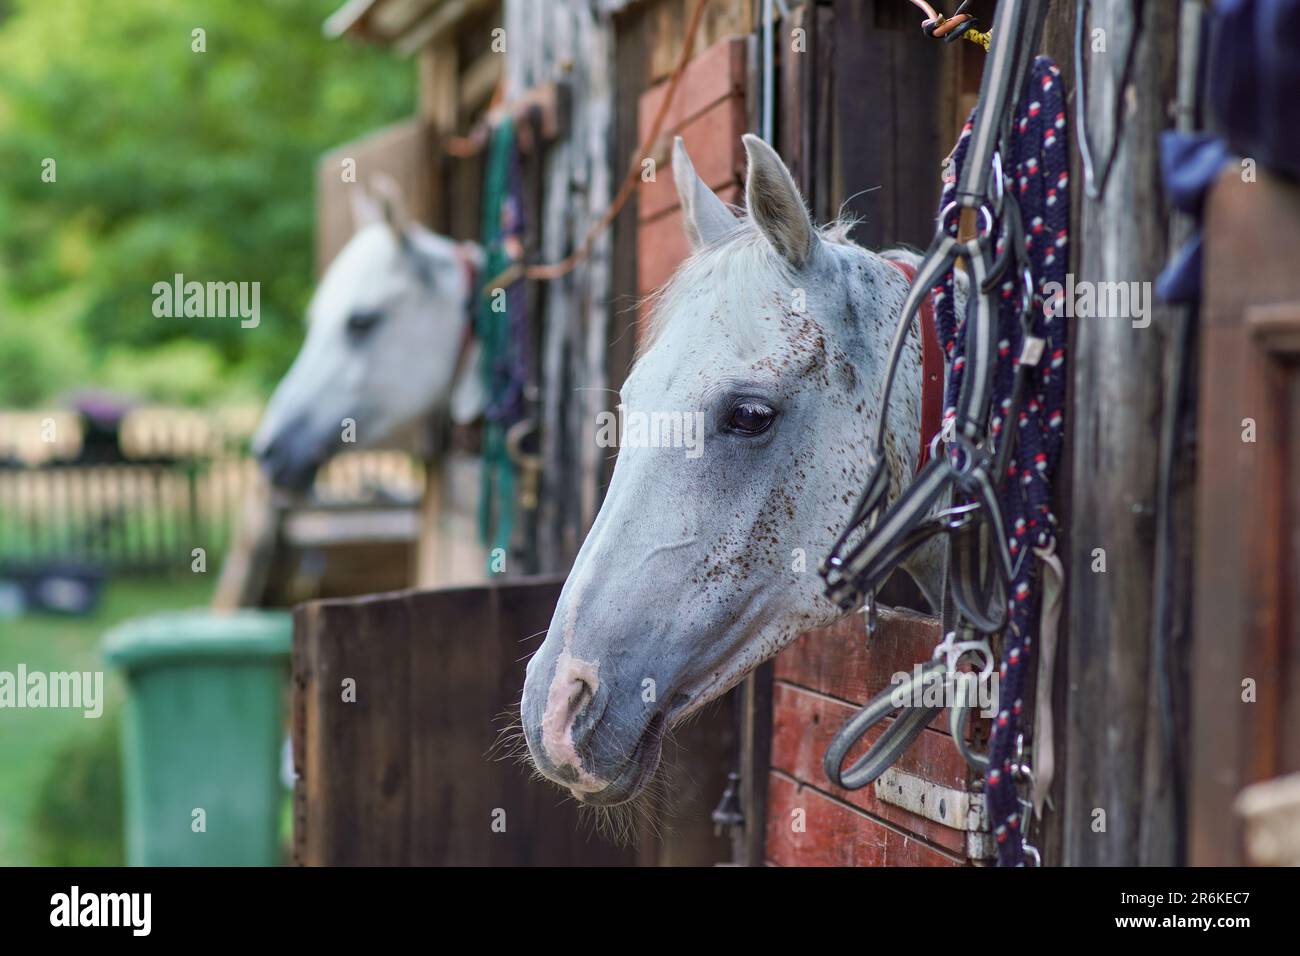 White Arabian horse with brown spots, detail - only head visible out from wooden stables box, another blurred animal background Stock Photo